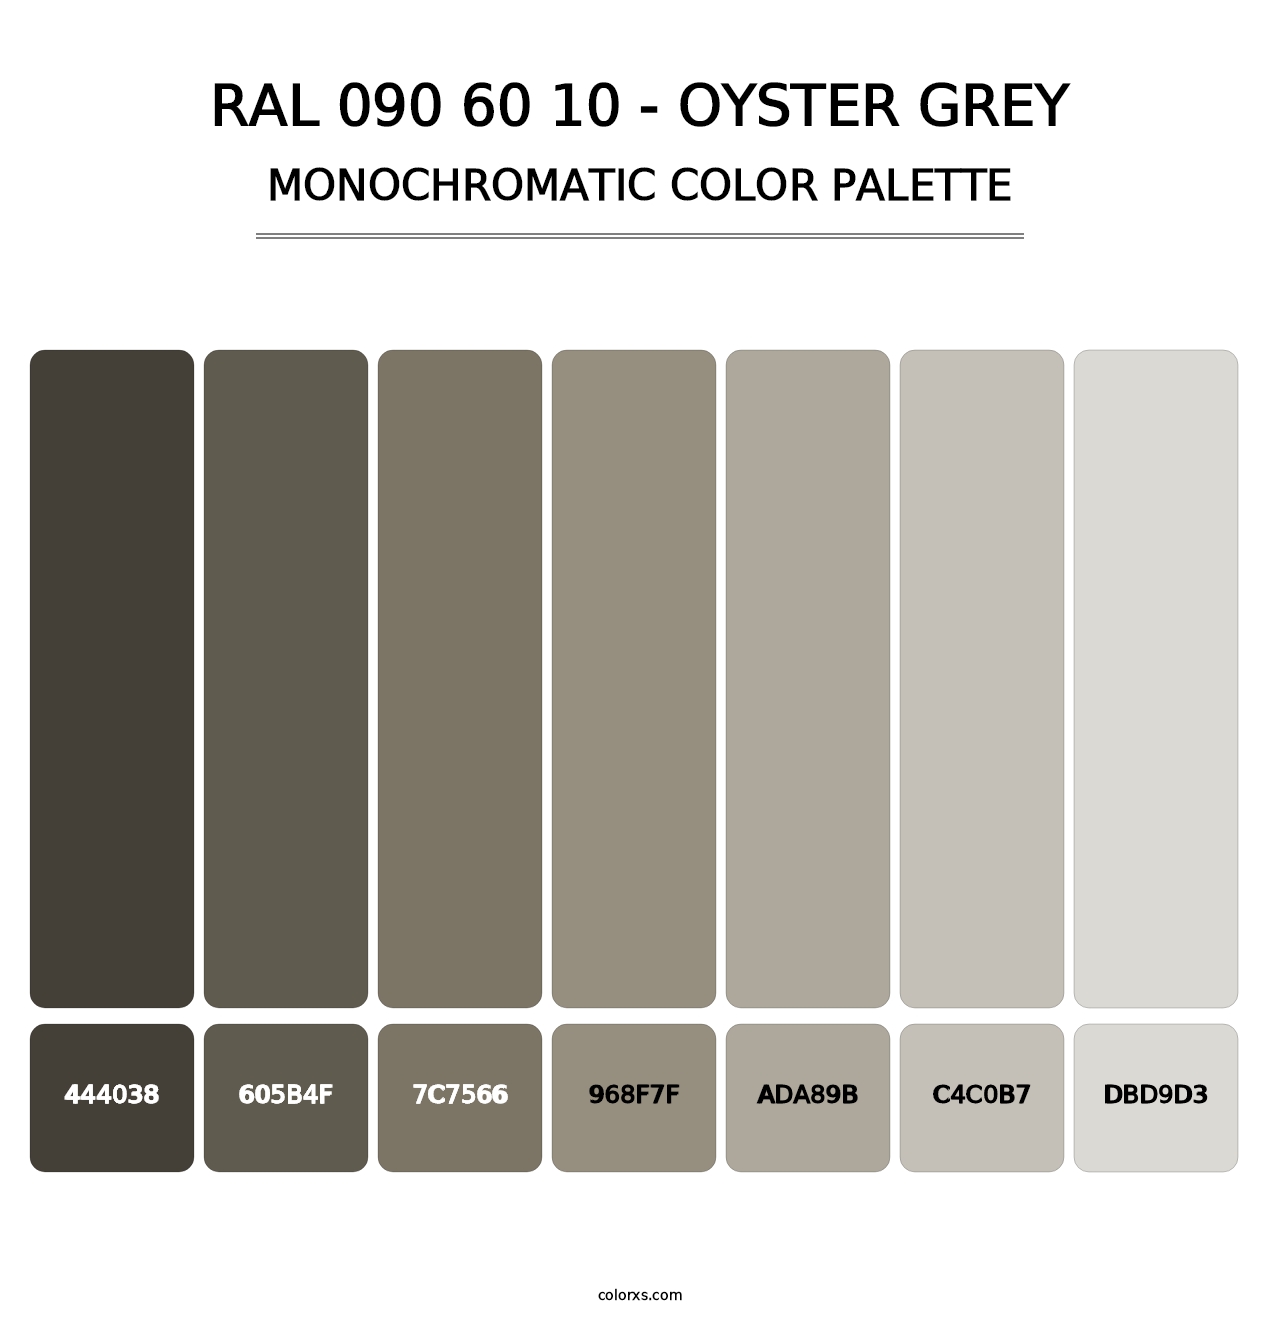 RAL 090 60 10 - Oyster Grey - Monochromatic Color Palette